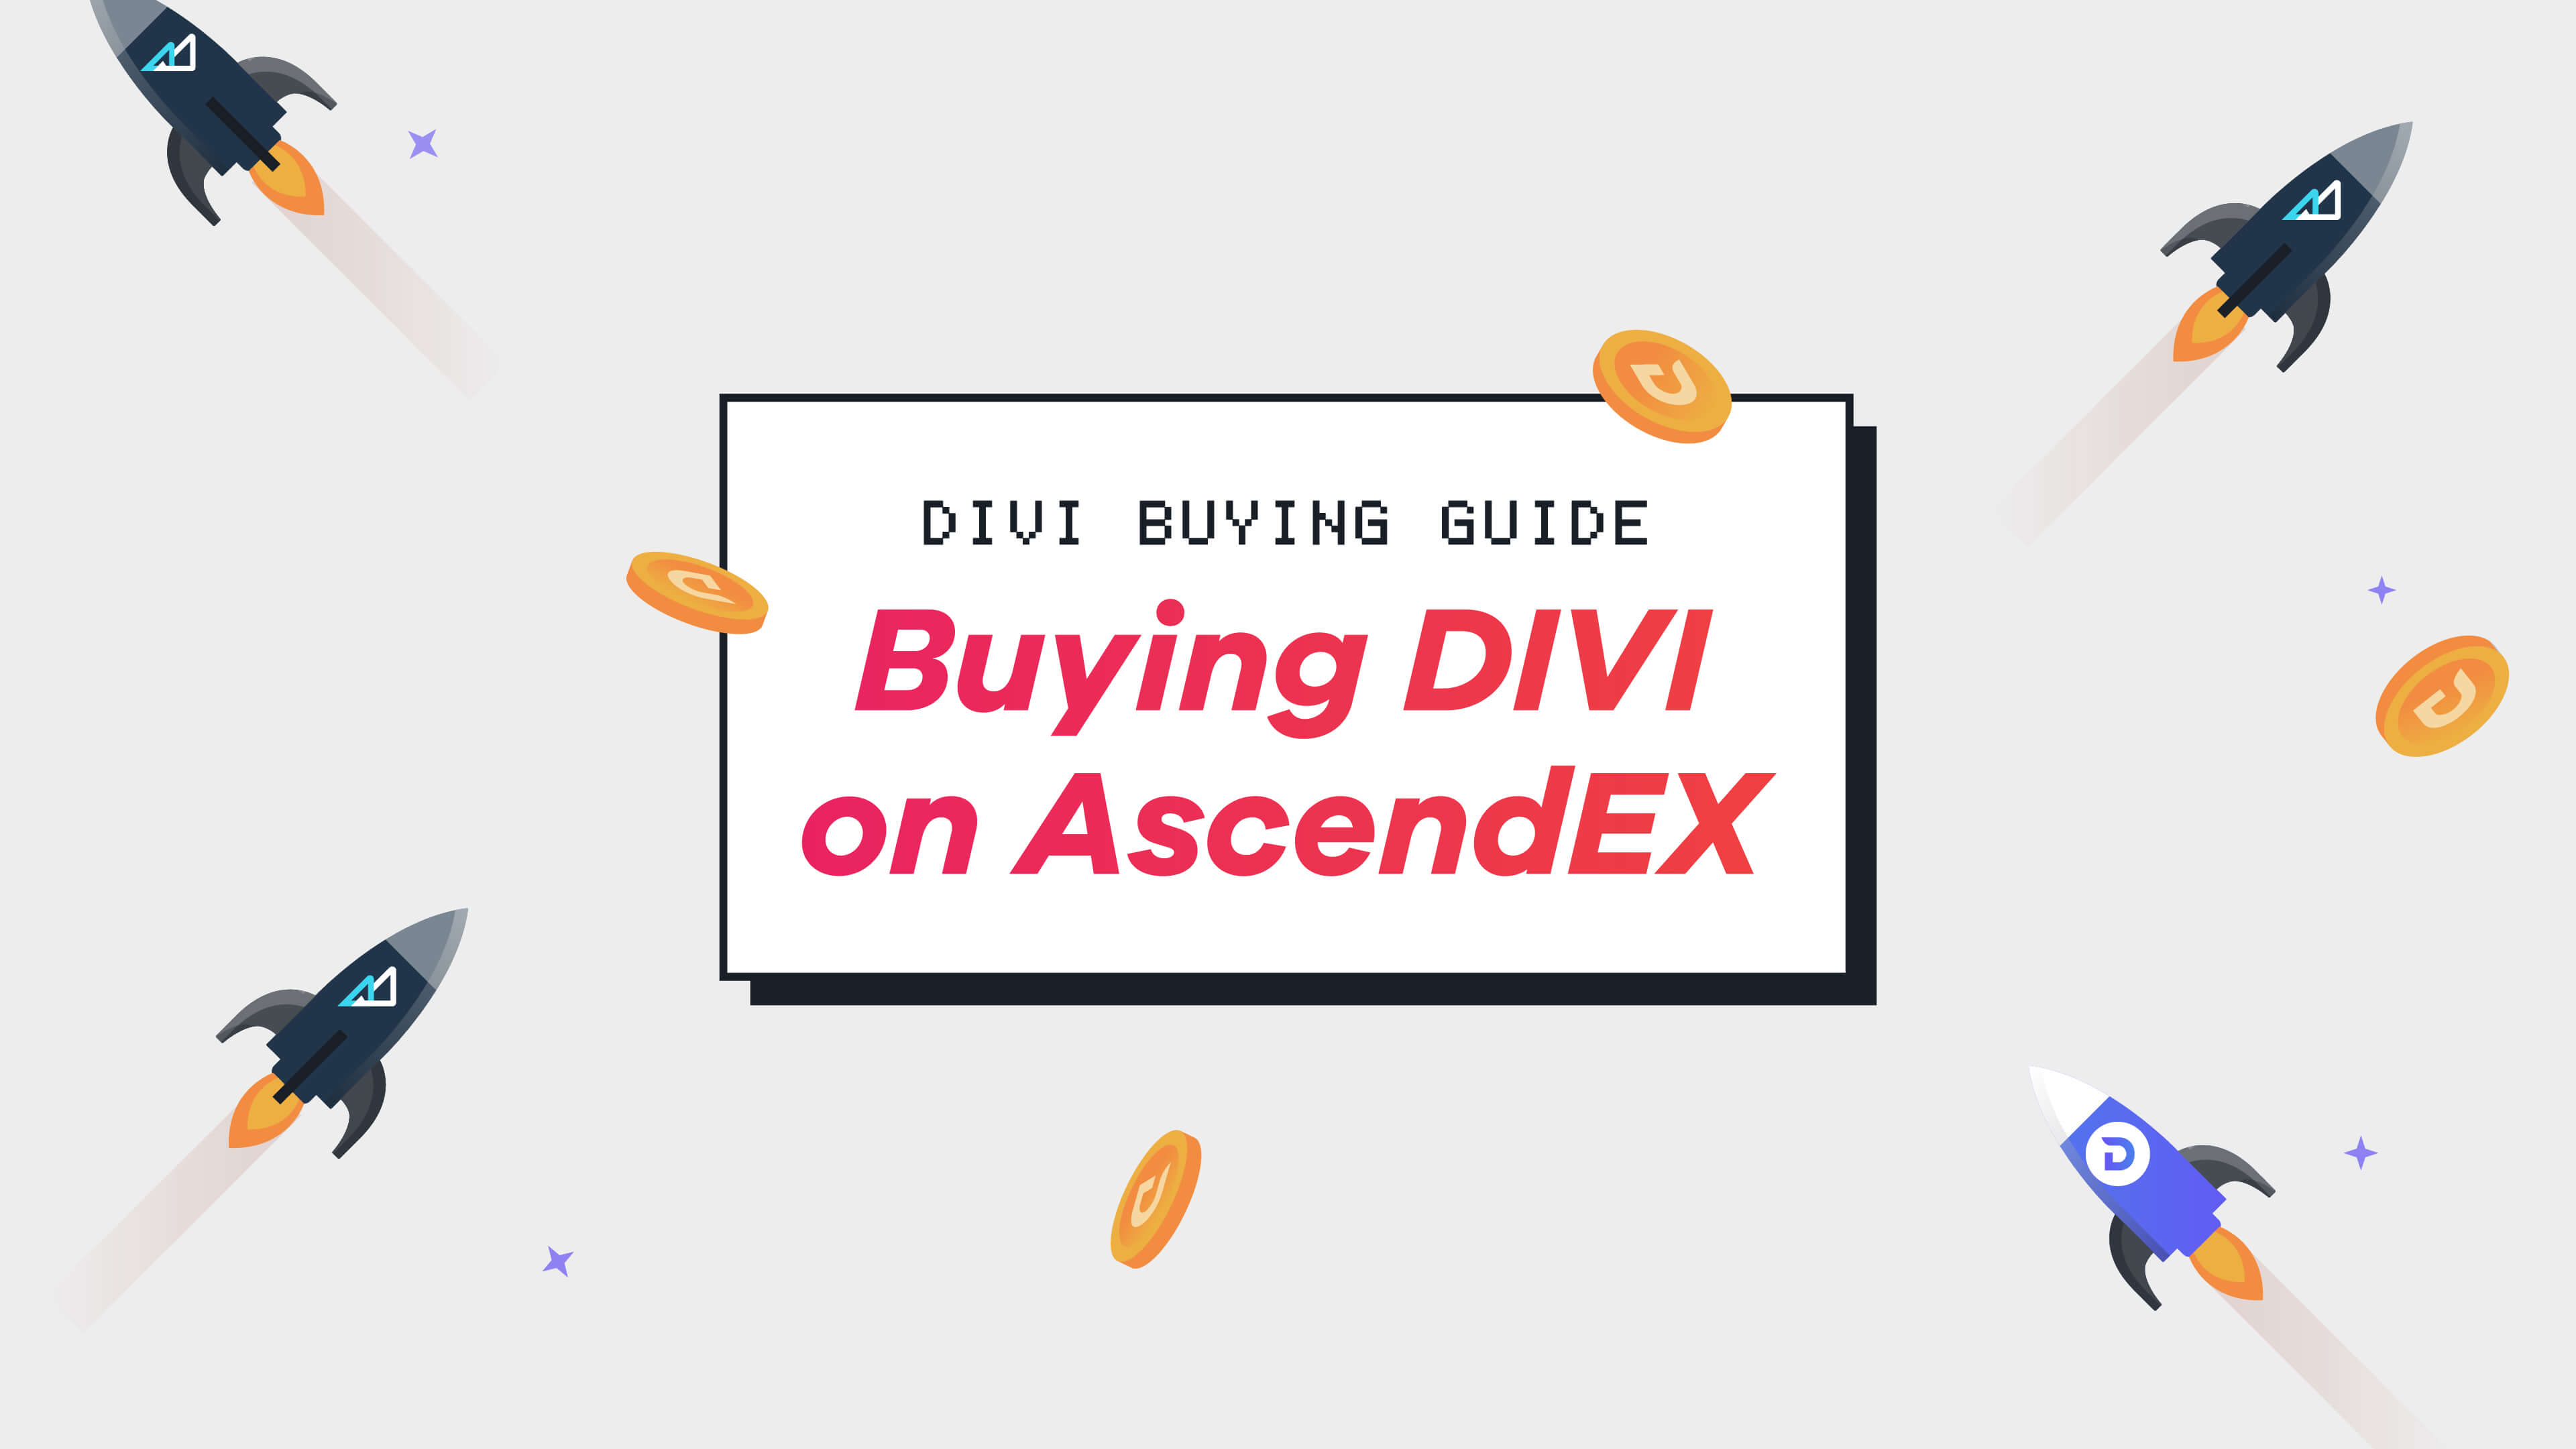 How to buy Divi on AscendEX